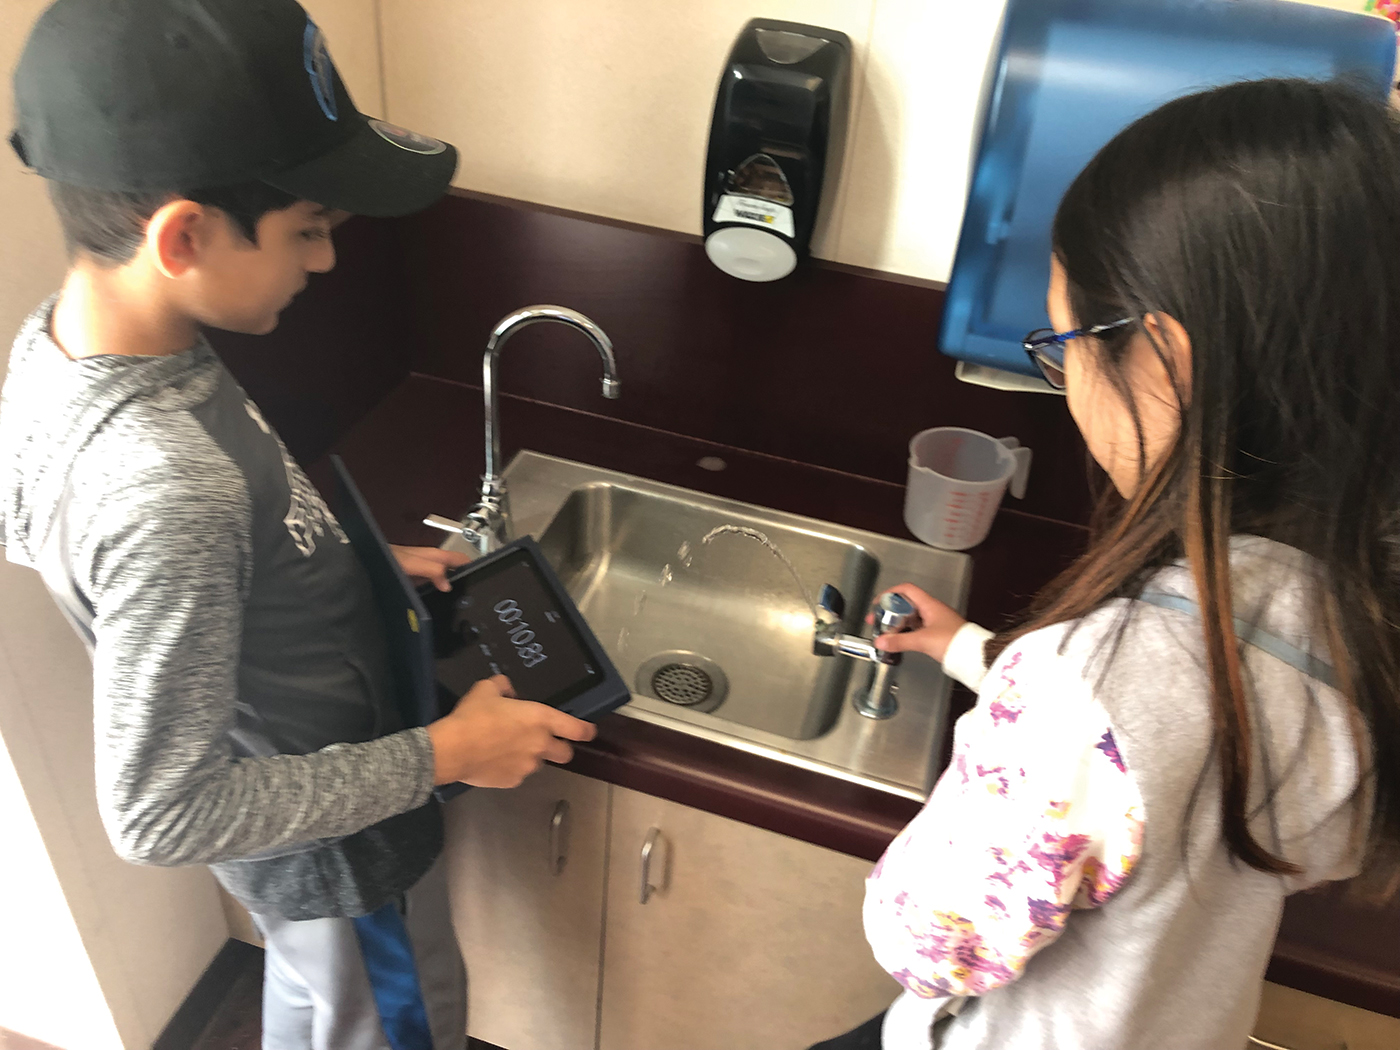 Students record the number of seconds the water continues to flow from a classroom water fountain after turning it off.